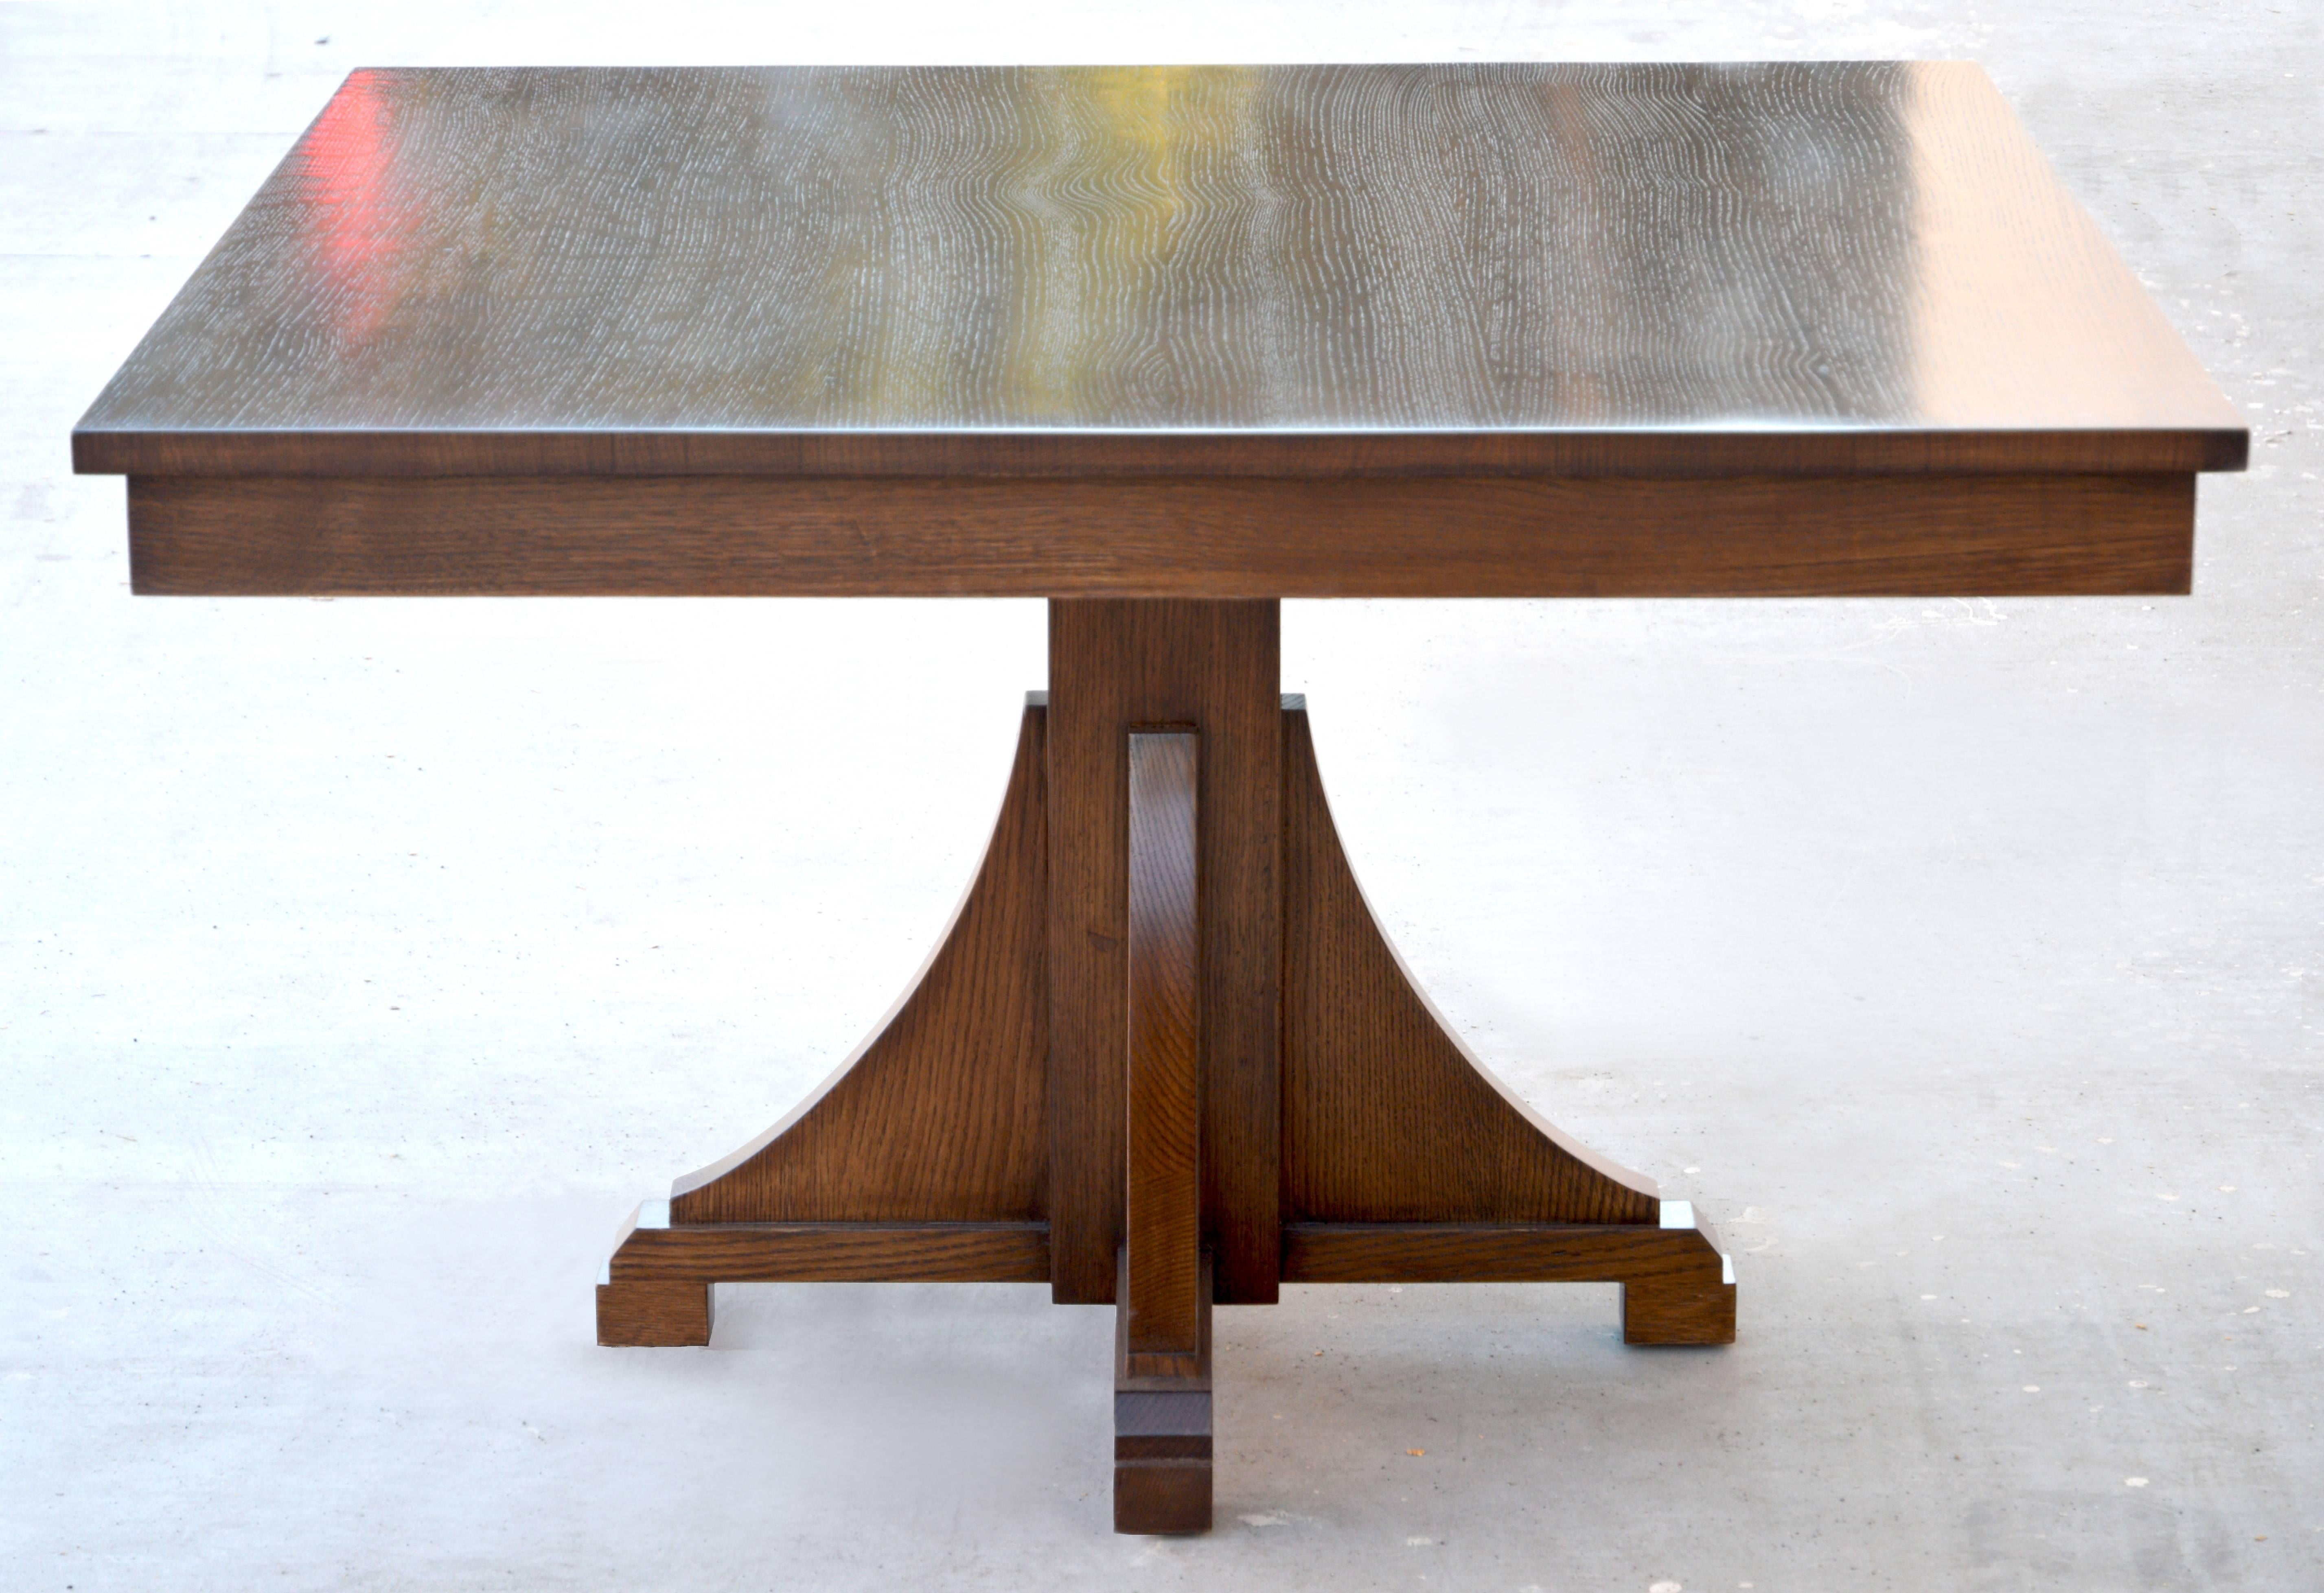 This classic American Craftsman design dining table / breakfast table is built to order. It is shown here in a 56